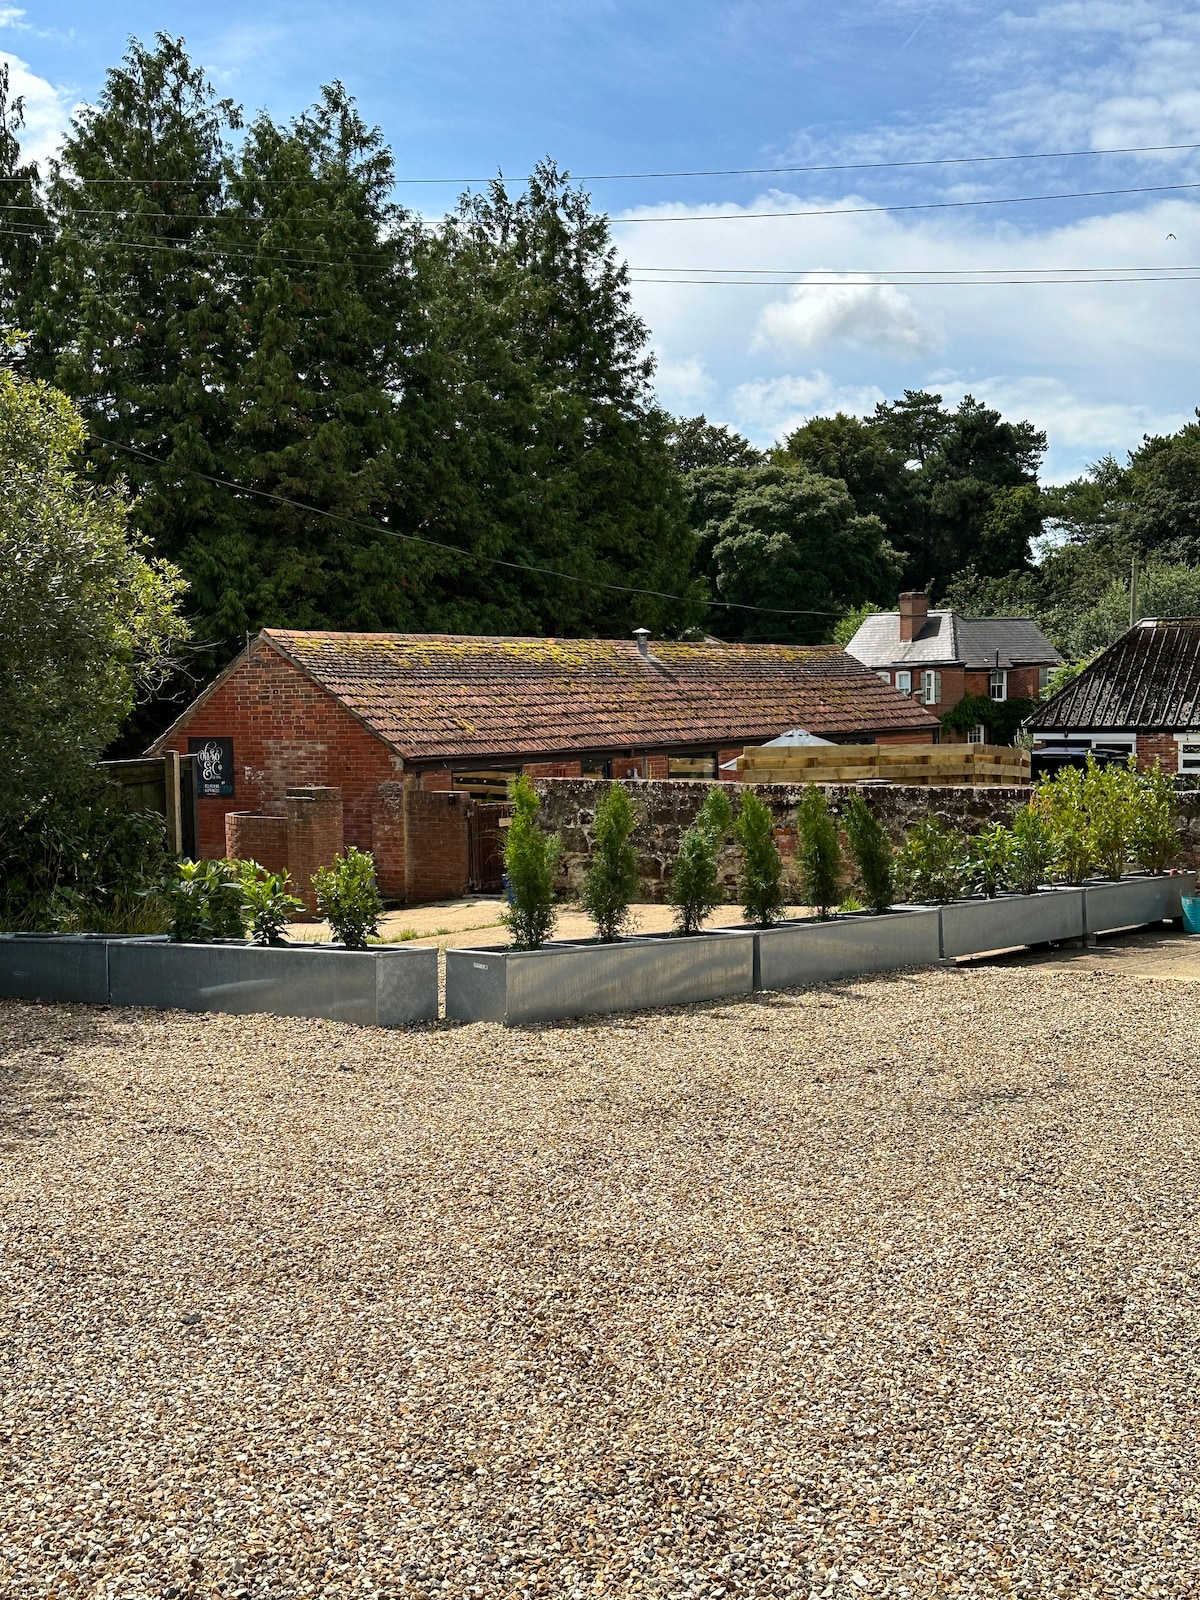 The Wimberry | 1880 Converted Barn | Isle of Wight